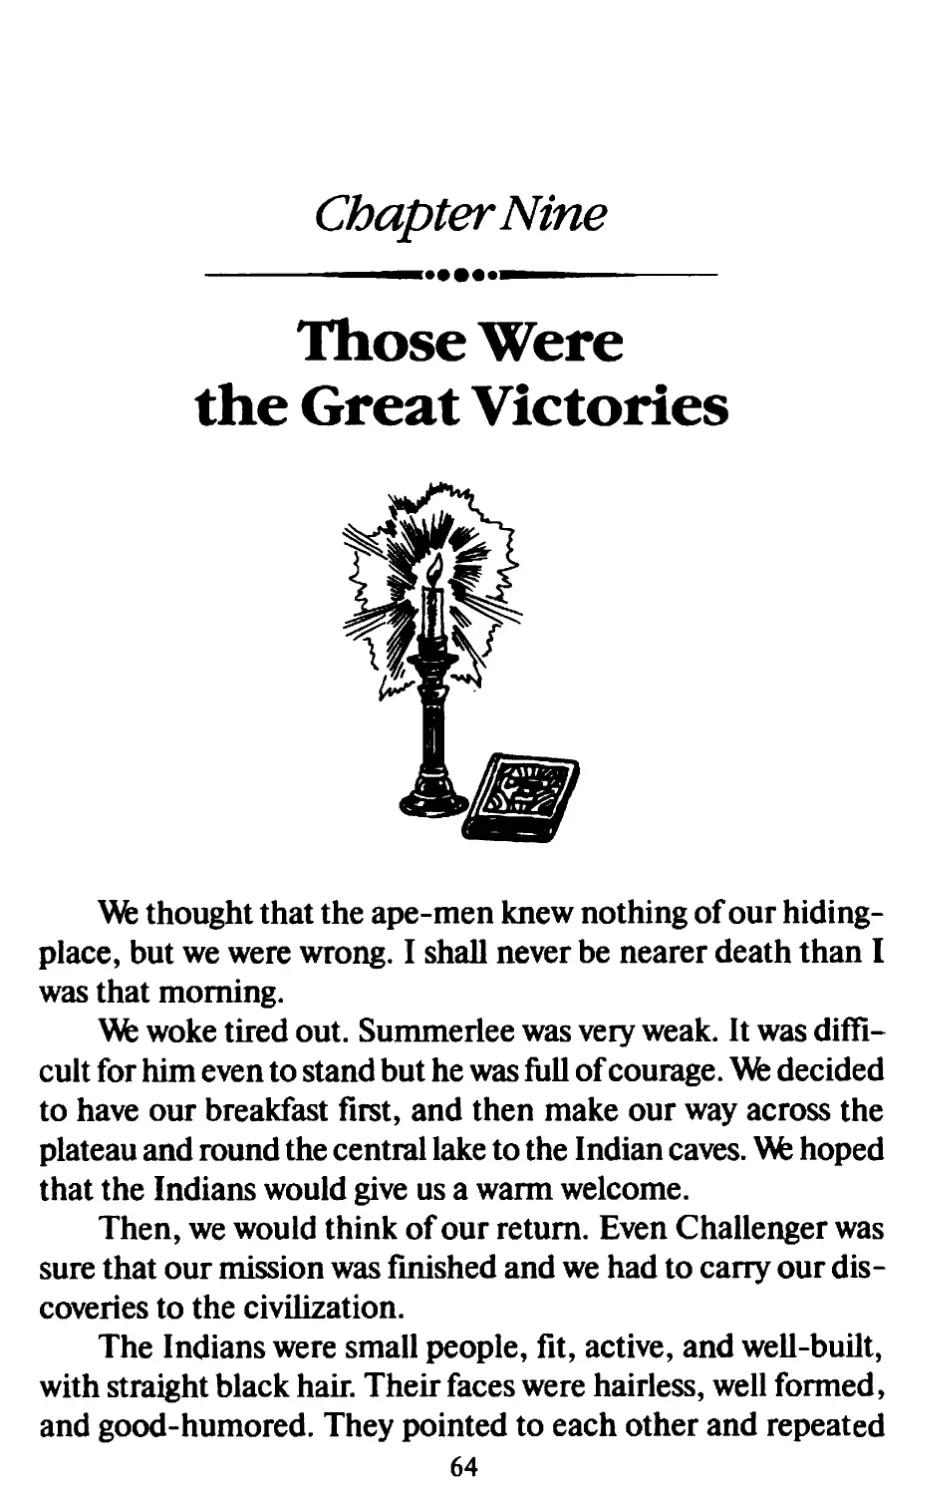 Chapter Nine. Those Wfere the Great Victories